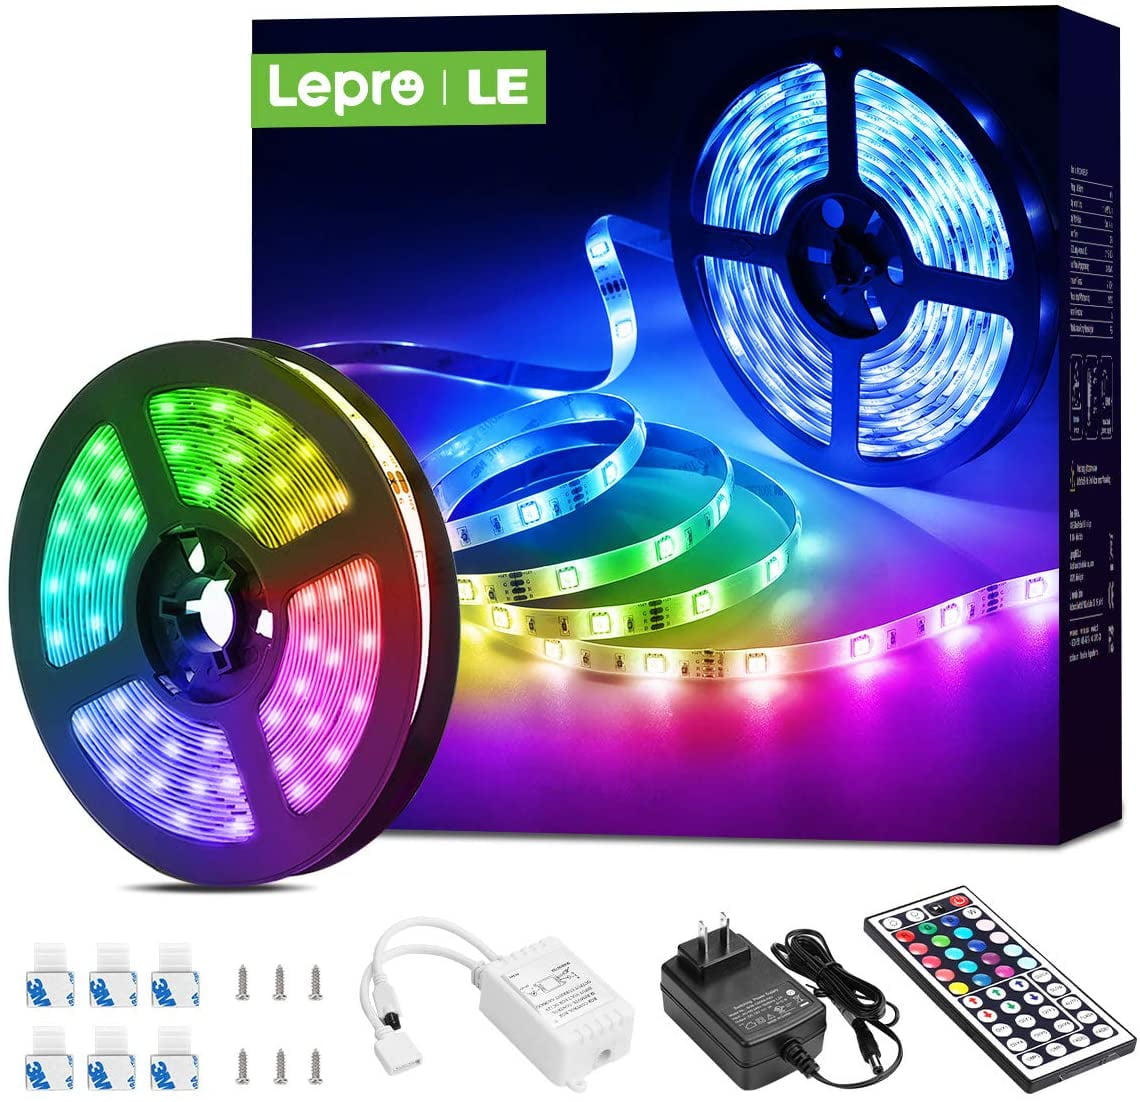 DC 12v LED Strip Lights with 44Key Remote Controller and Power Supply for Kitchen Bedroom Party Indoor/Outdoor Ornament 150 Units 5050 RGB LED Strip Lights 16.4ft LED Flexible Strip Lights 